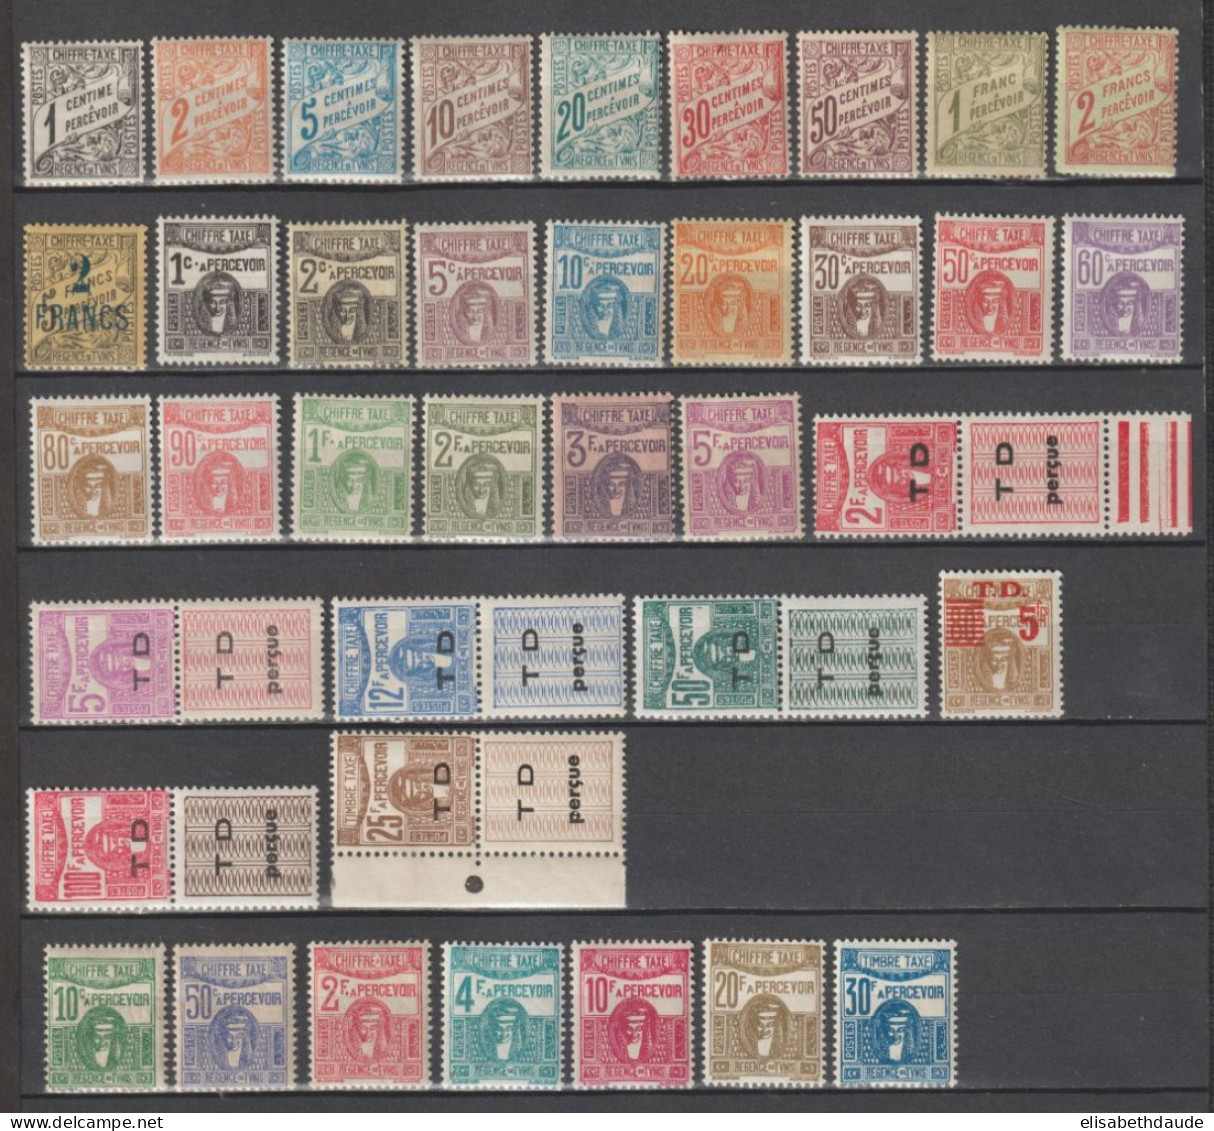 TUNISIE - 1901/1945 - TAXE PRESQUE COMPLET - YVERT 26/34+36/50+52+54/65 * MH (PLUPART MLH !) - COTE = 62.25 EUR. - - Postage Due